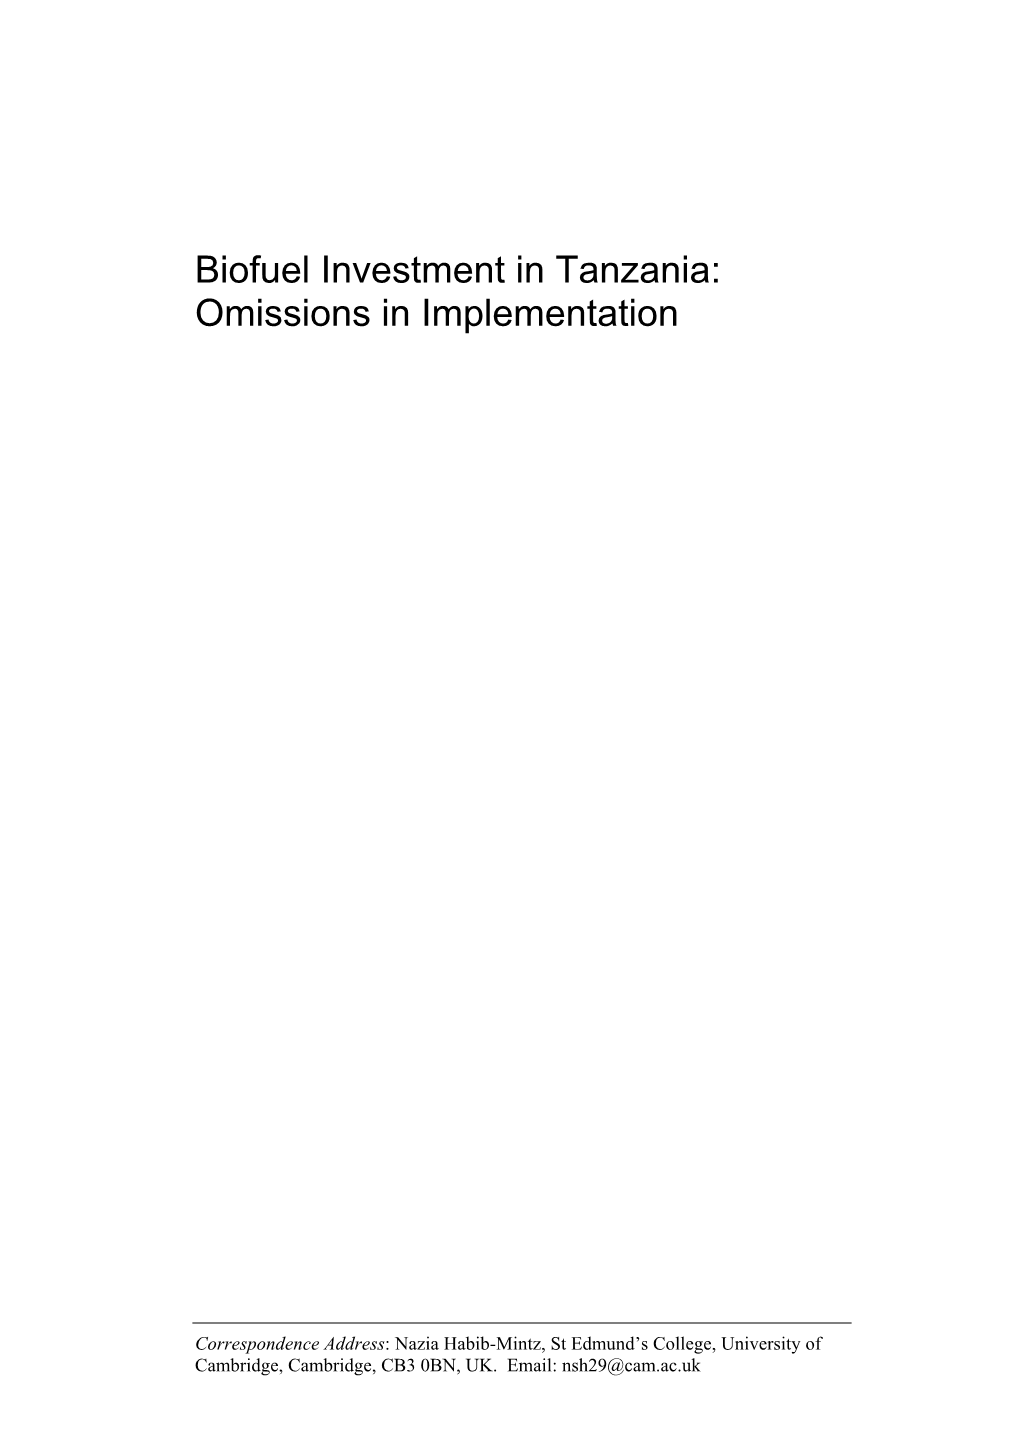 Biofuel Investment in Tanzania: Omissions in Implementation